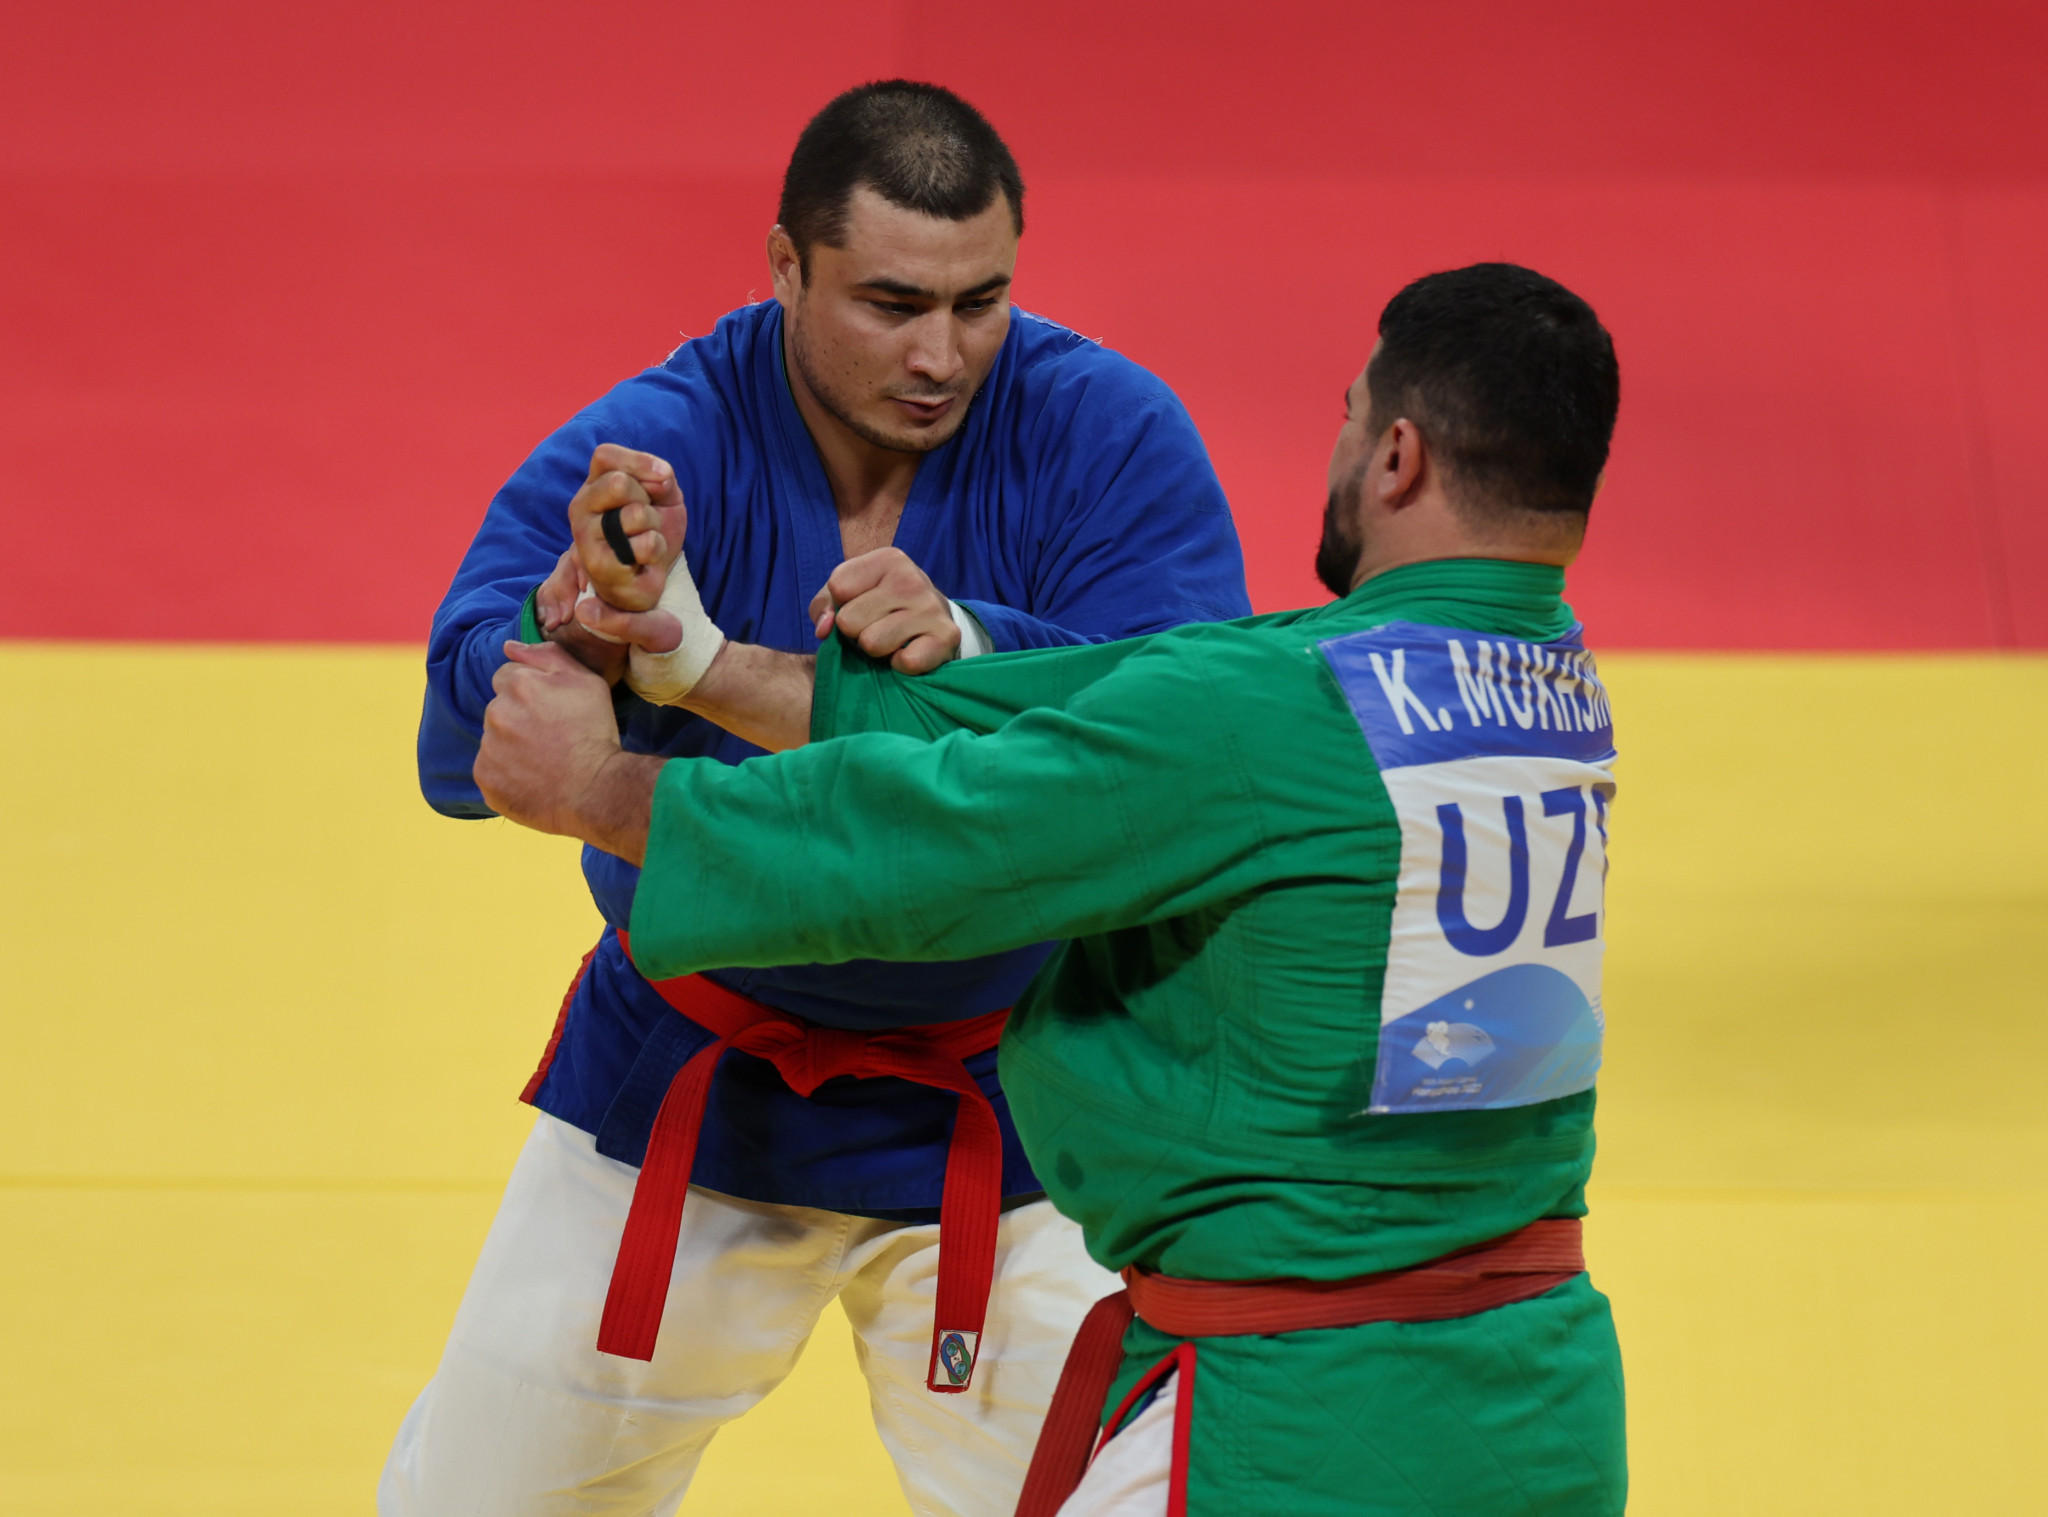 Mukhsin Khisomiddinov, right, was one of three Uzbek gold medallists as the country claimed all three golds ©Hangzhou 2022